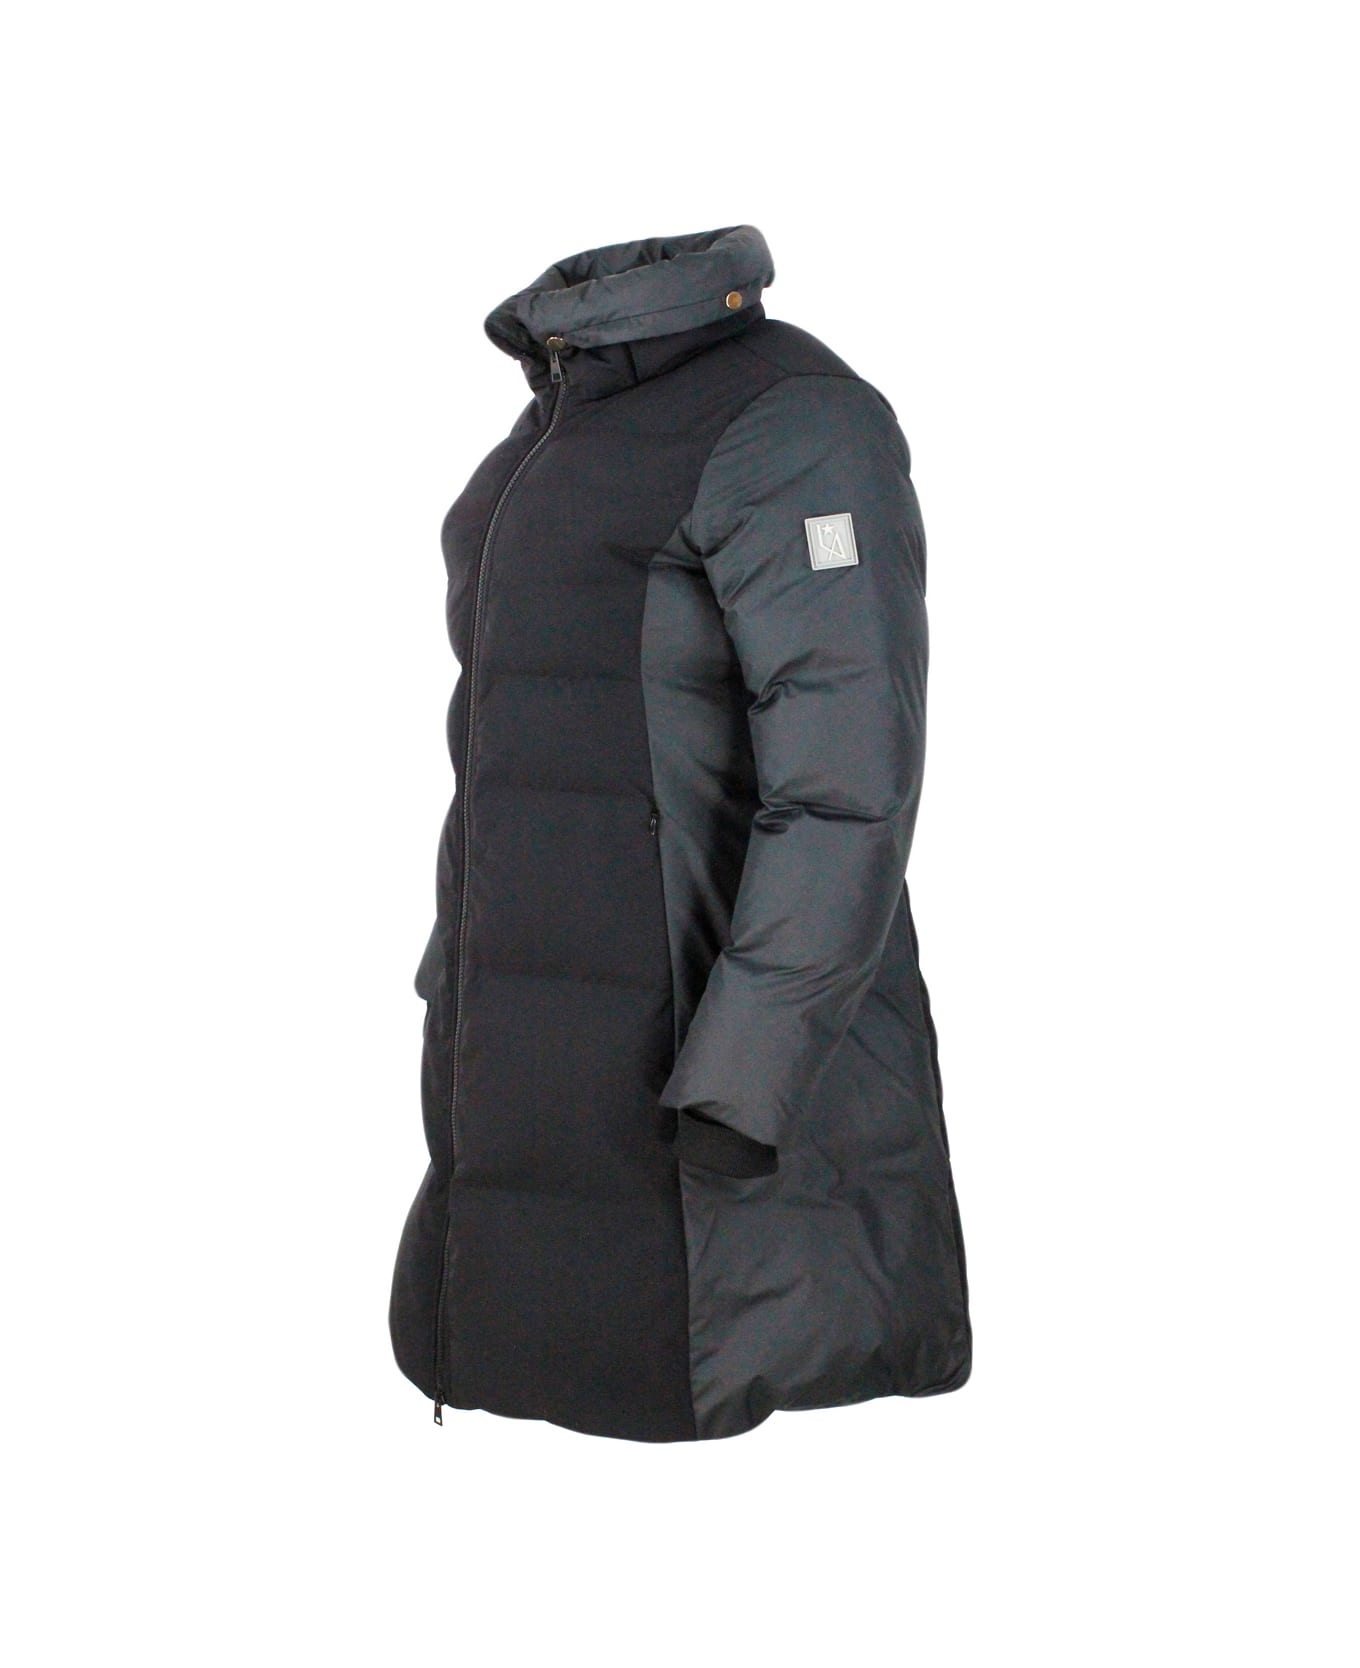 Lorena Antoniazzi Chalet Collection Down Jacket In Two-tone Technical Fabric With Openable Collar And Zip Closure - Black